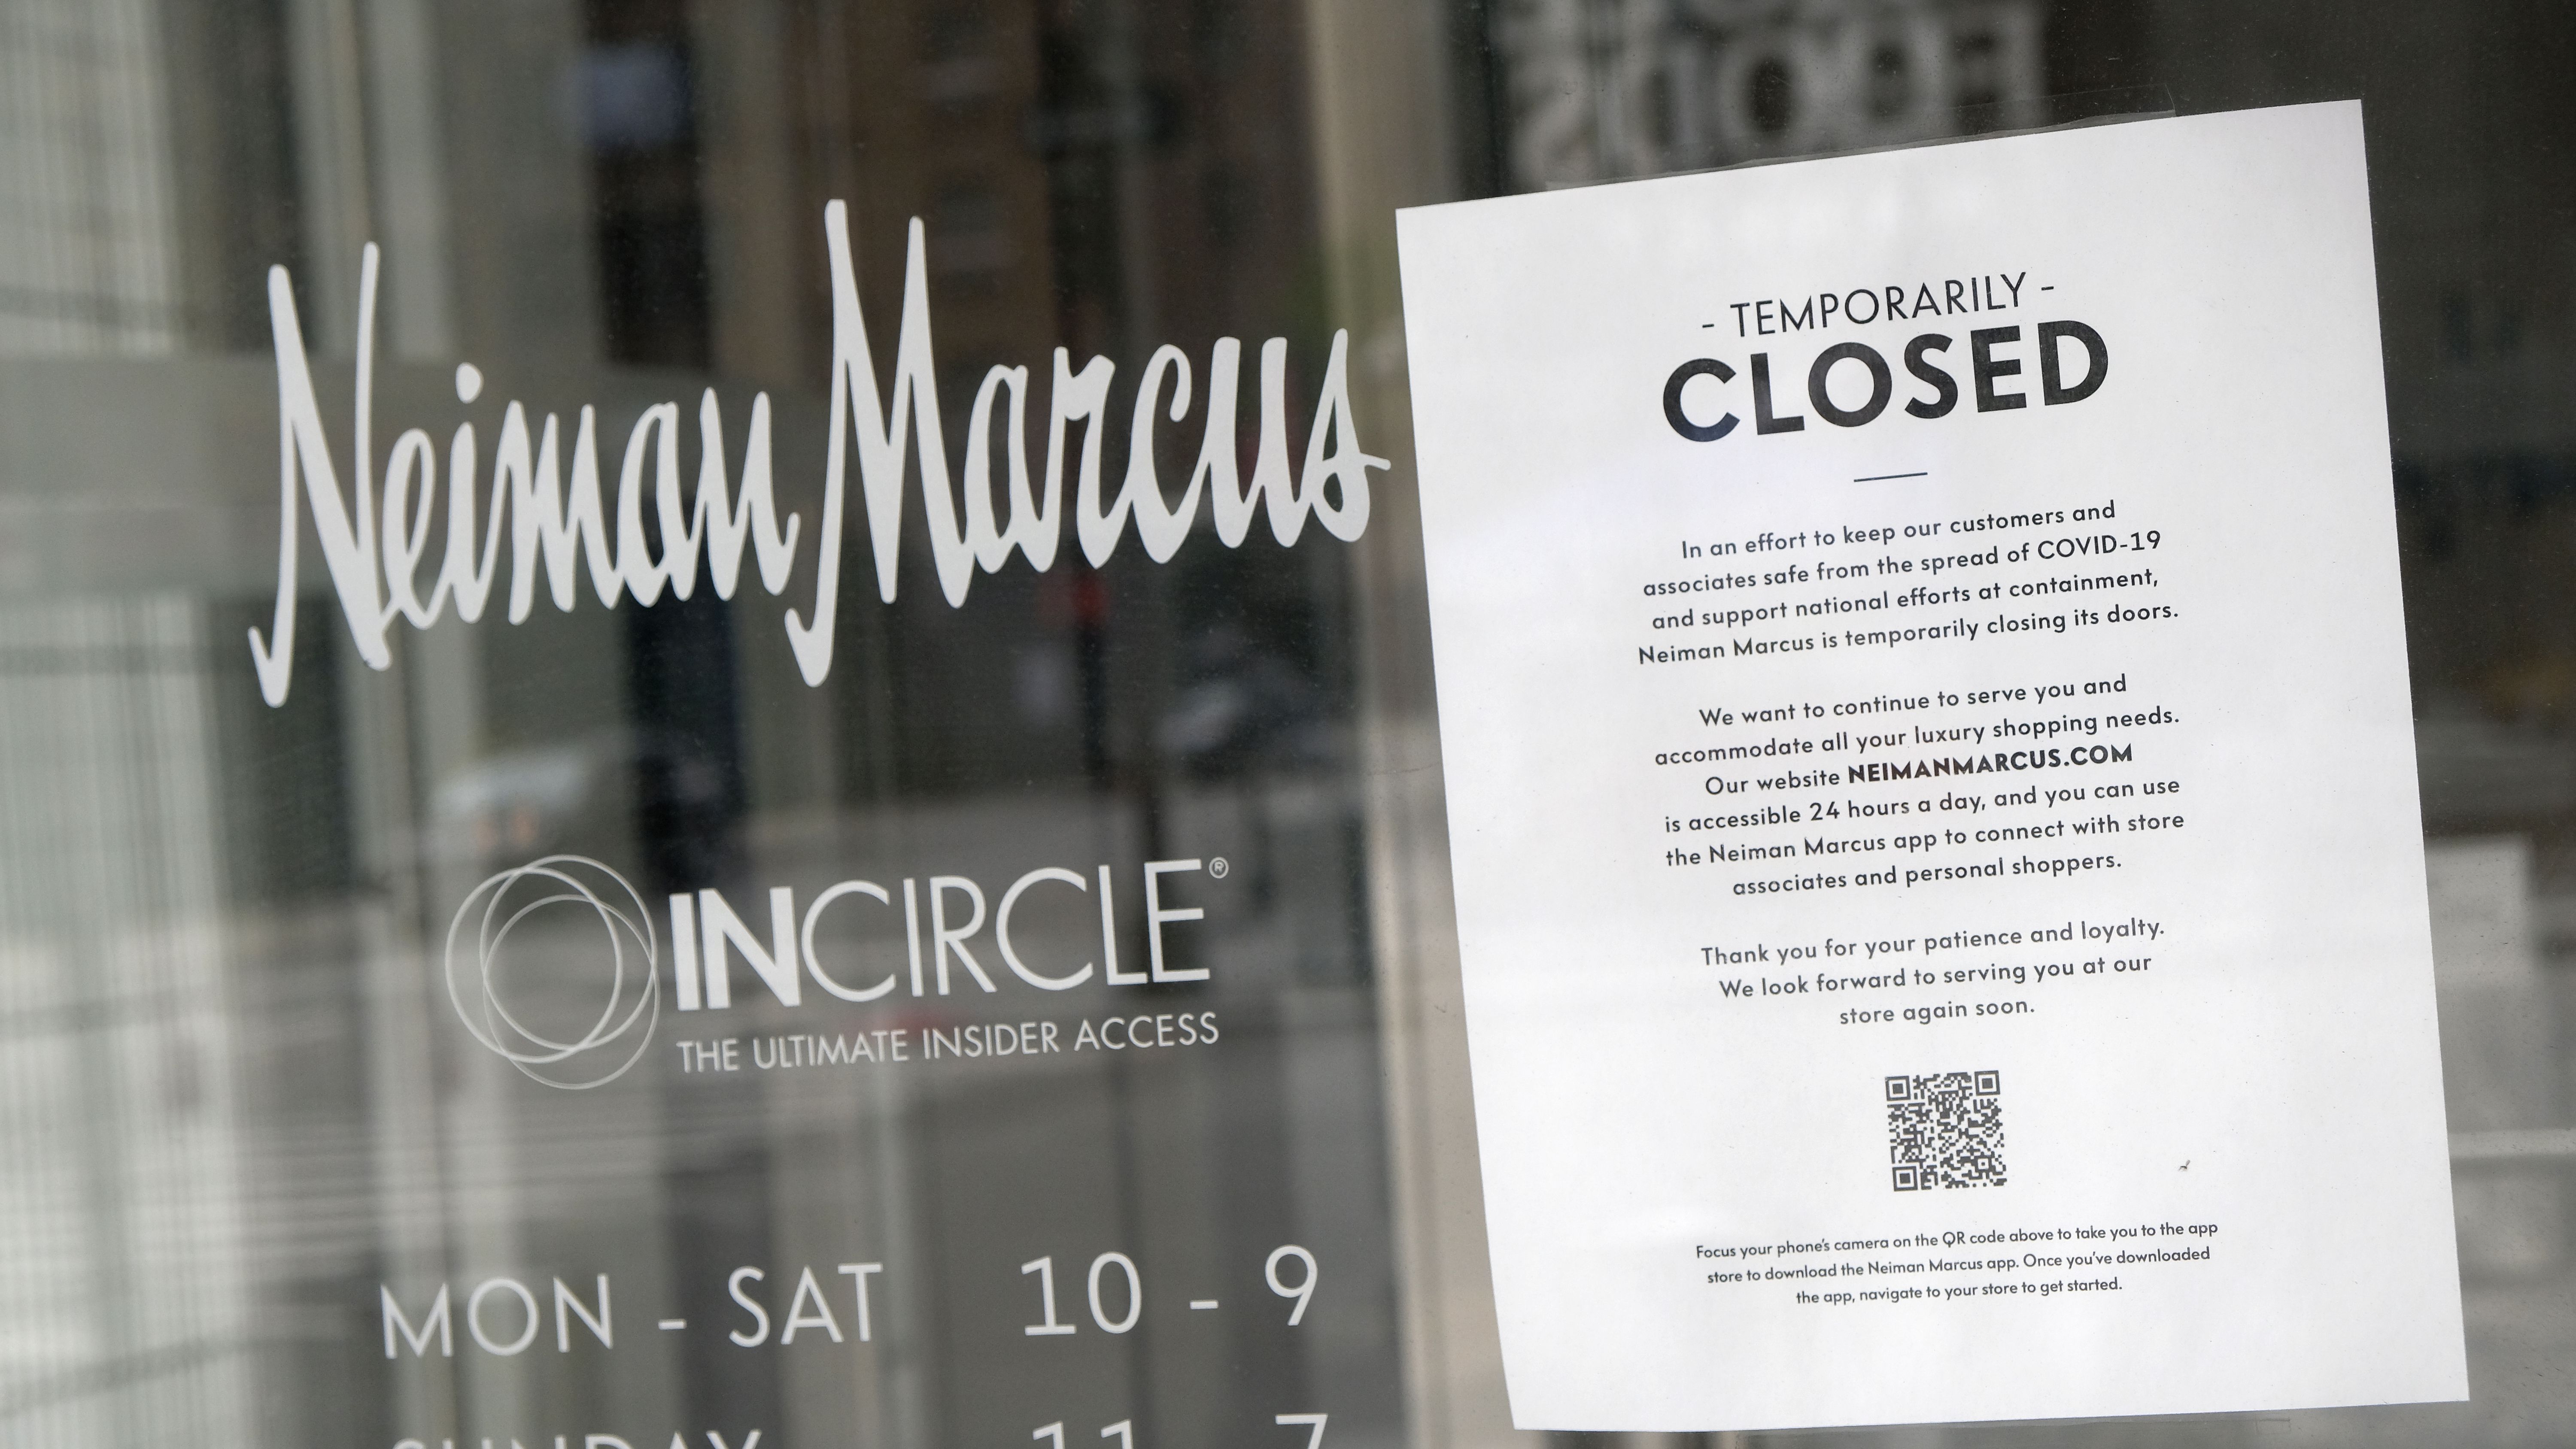 Neiman Marcus Files Chapter 11, First Major Retail Chain in COVID-19 Crisis